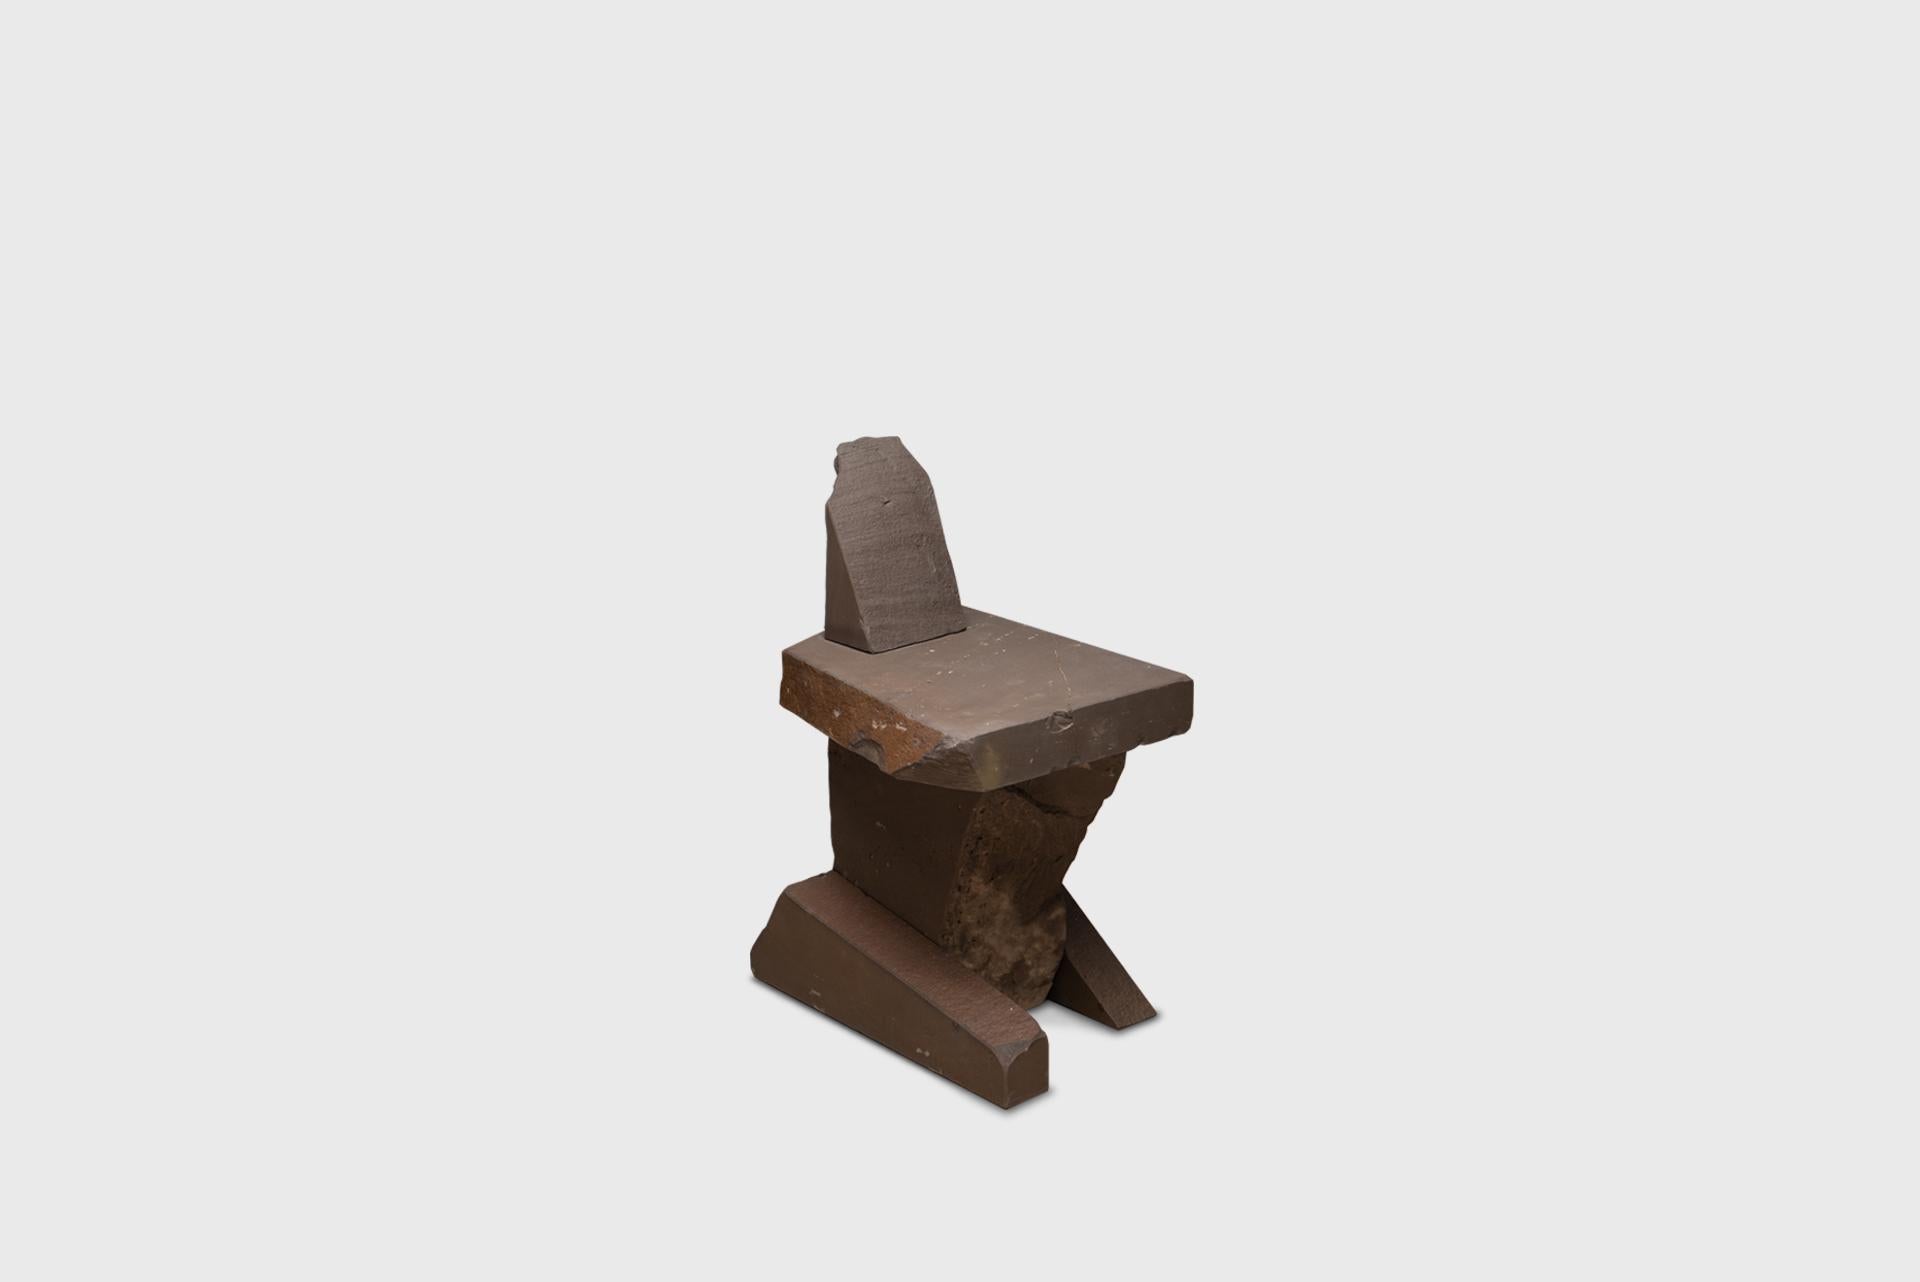 Contemporary Natural Chair 17, Graywacke Offcut Gray Stone, Carsten in der Elst For Sale 8